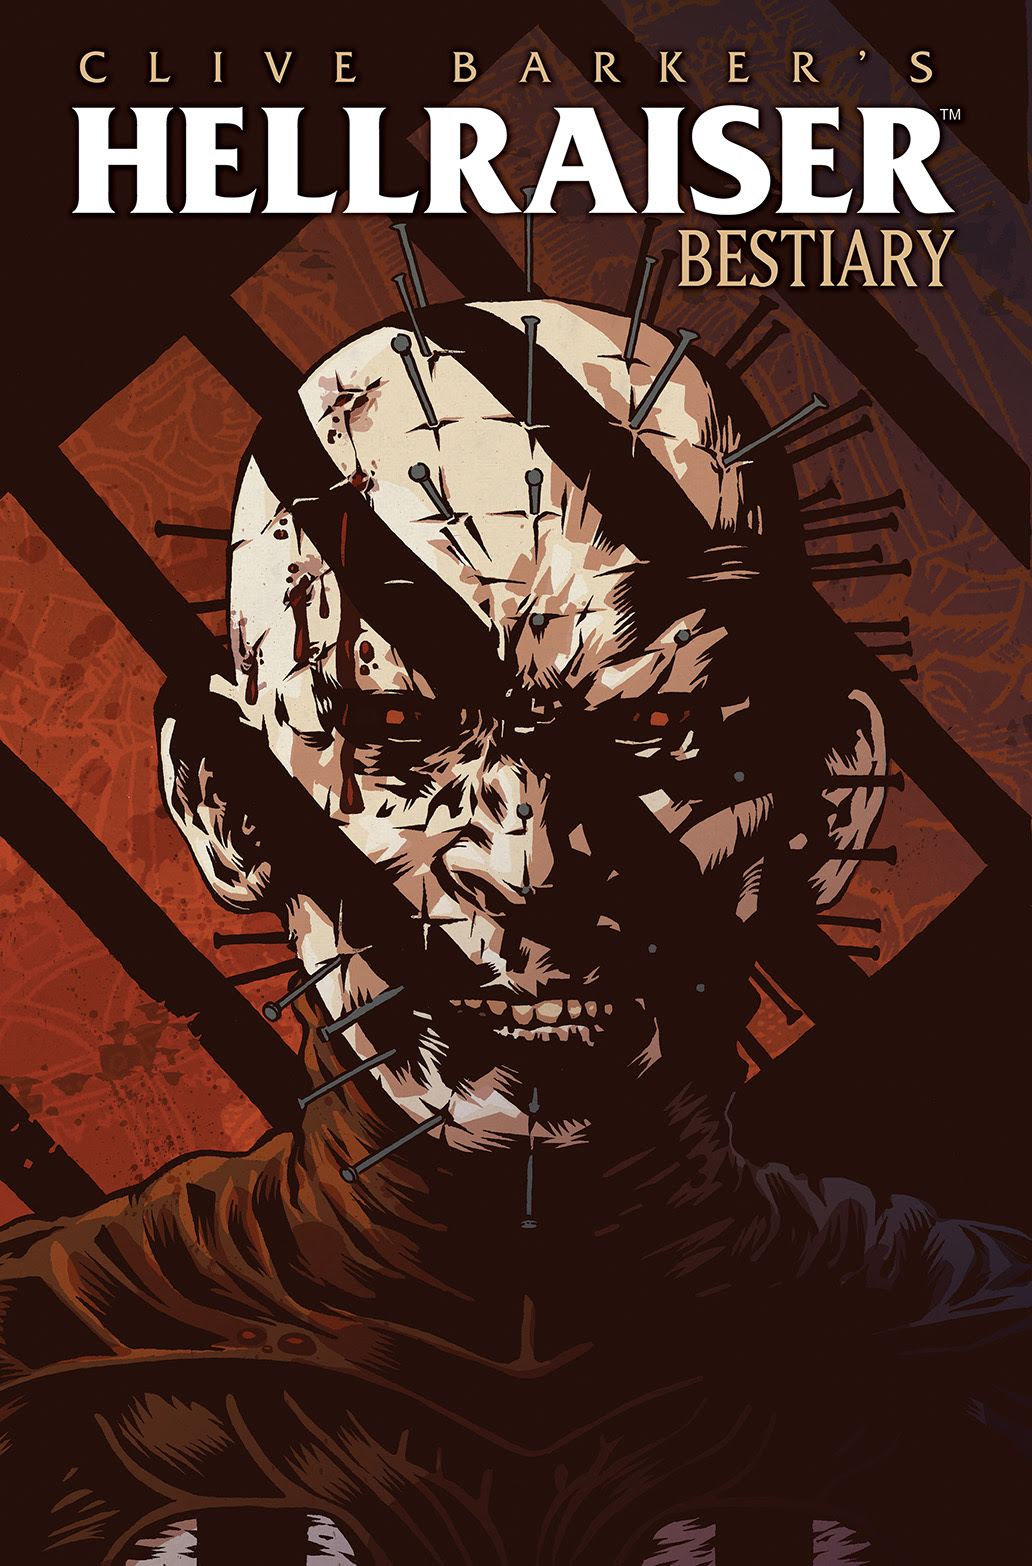 CLIVE BARKER'S HELLRAISER: BESTIARY #2 Cover A by Conor Nolan